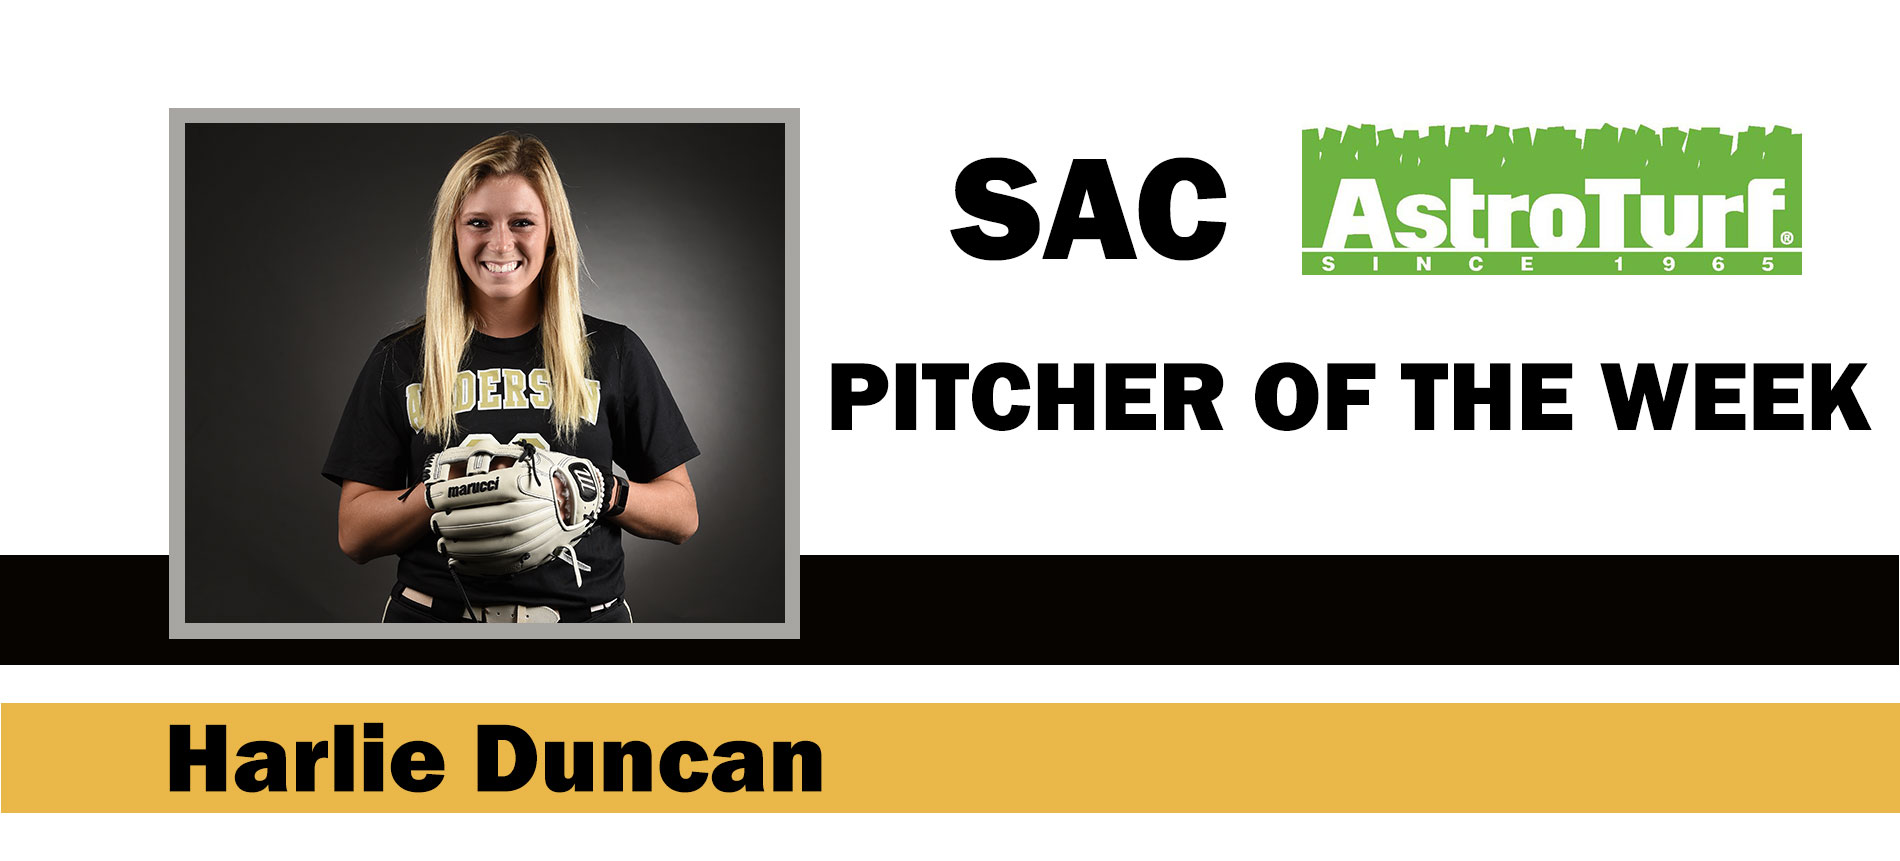 Duncan Earns South Atlantic Conference AstroTurf Pitcher of the Week